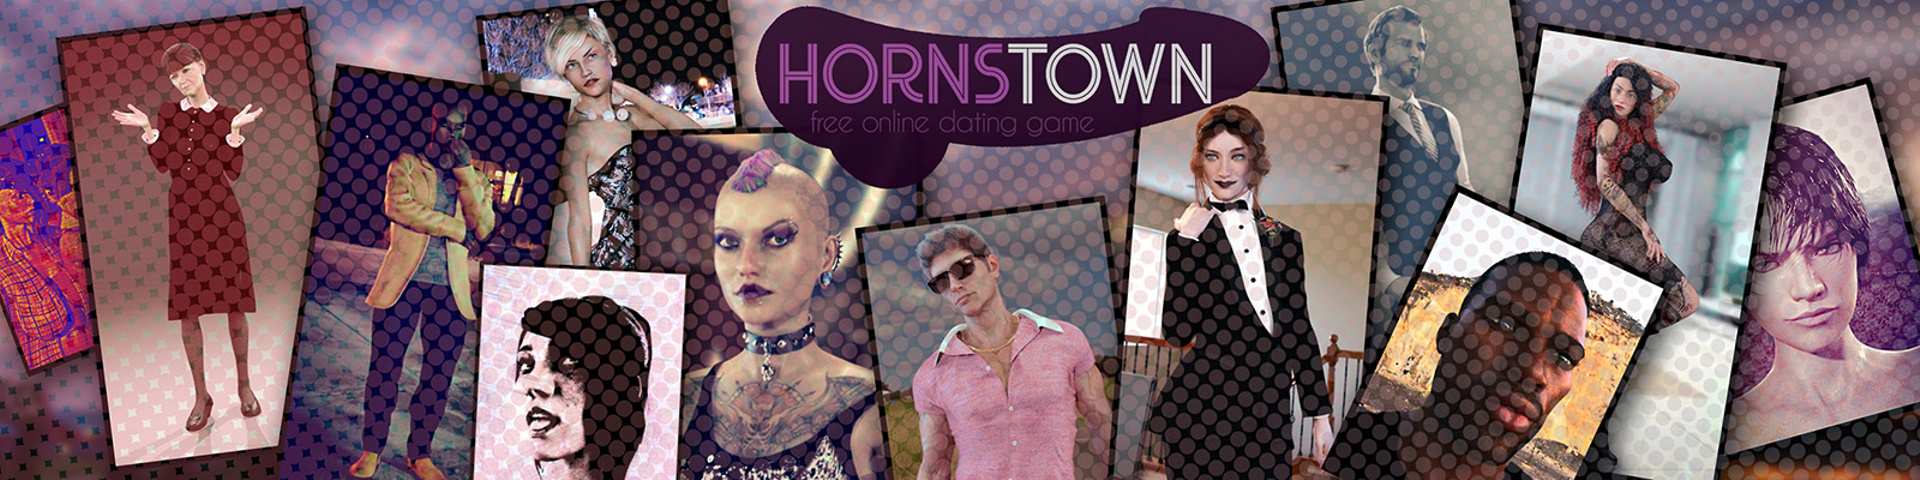 Hard Times in Hornstown [Unlikely] Adult xxx Game Download